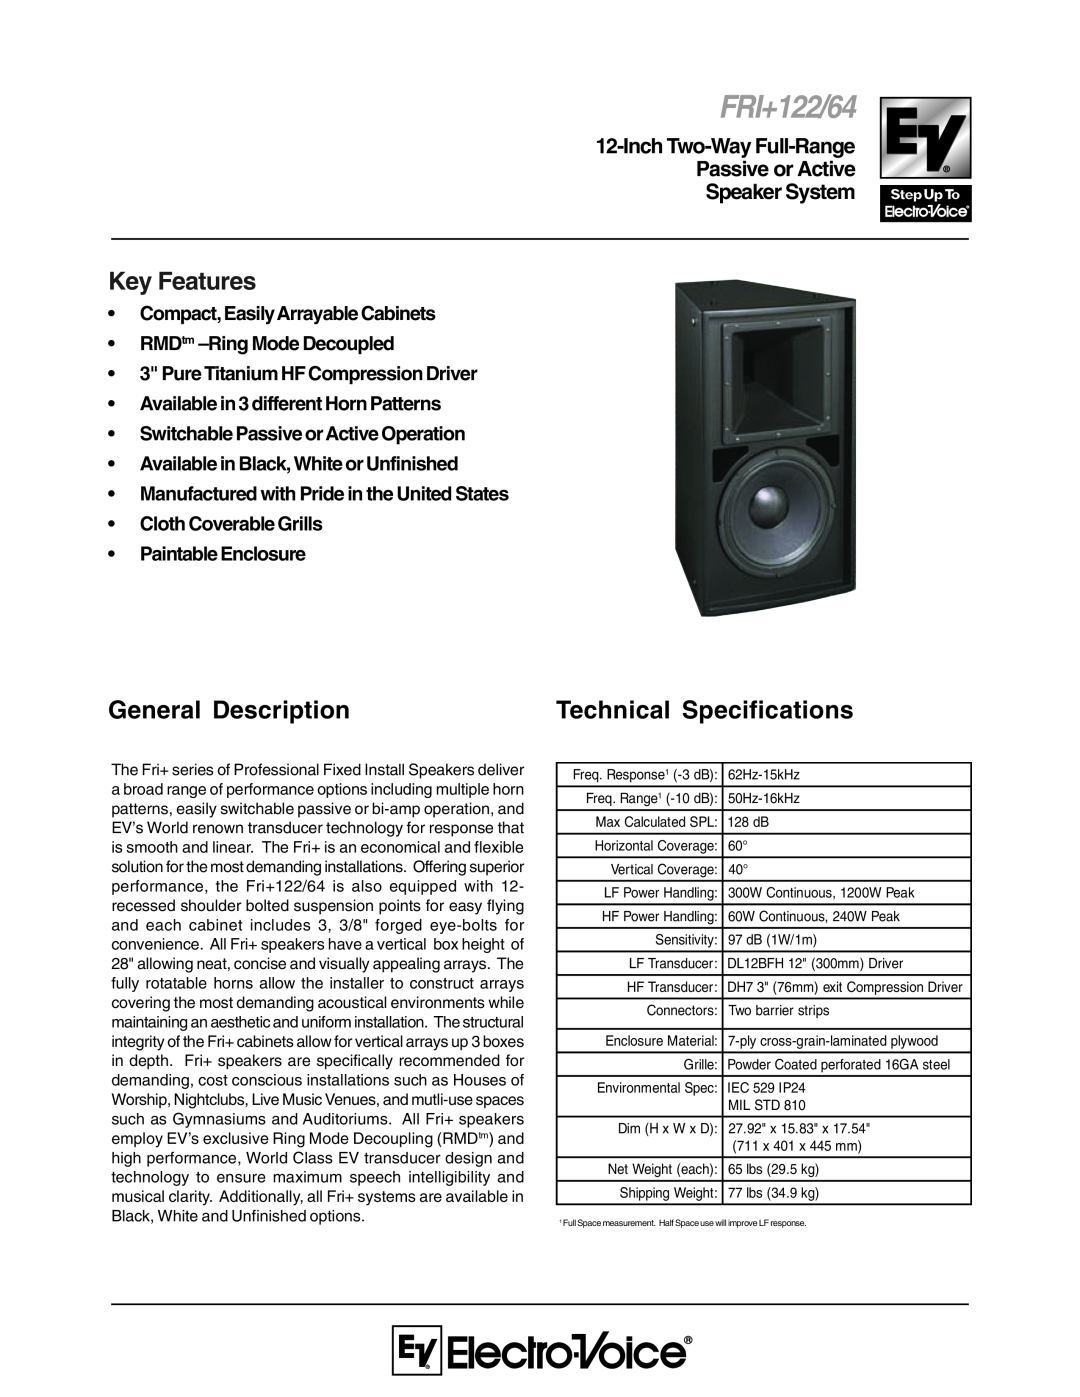 Electro-Voice Fri+122/64 technical specifications FRI+122/64, General Description, Technical Specifications, Key Features 